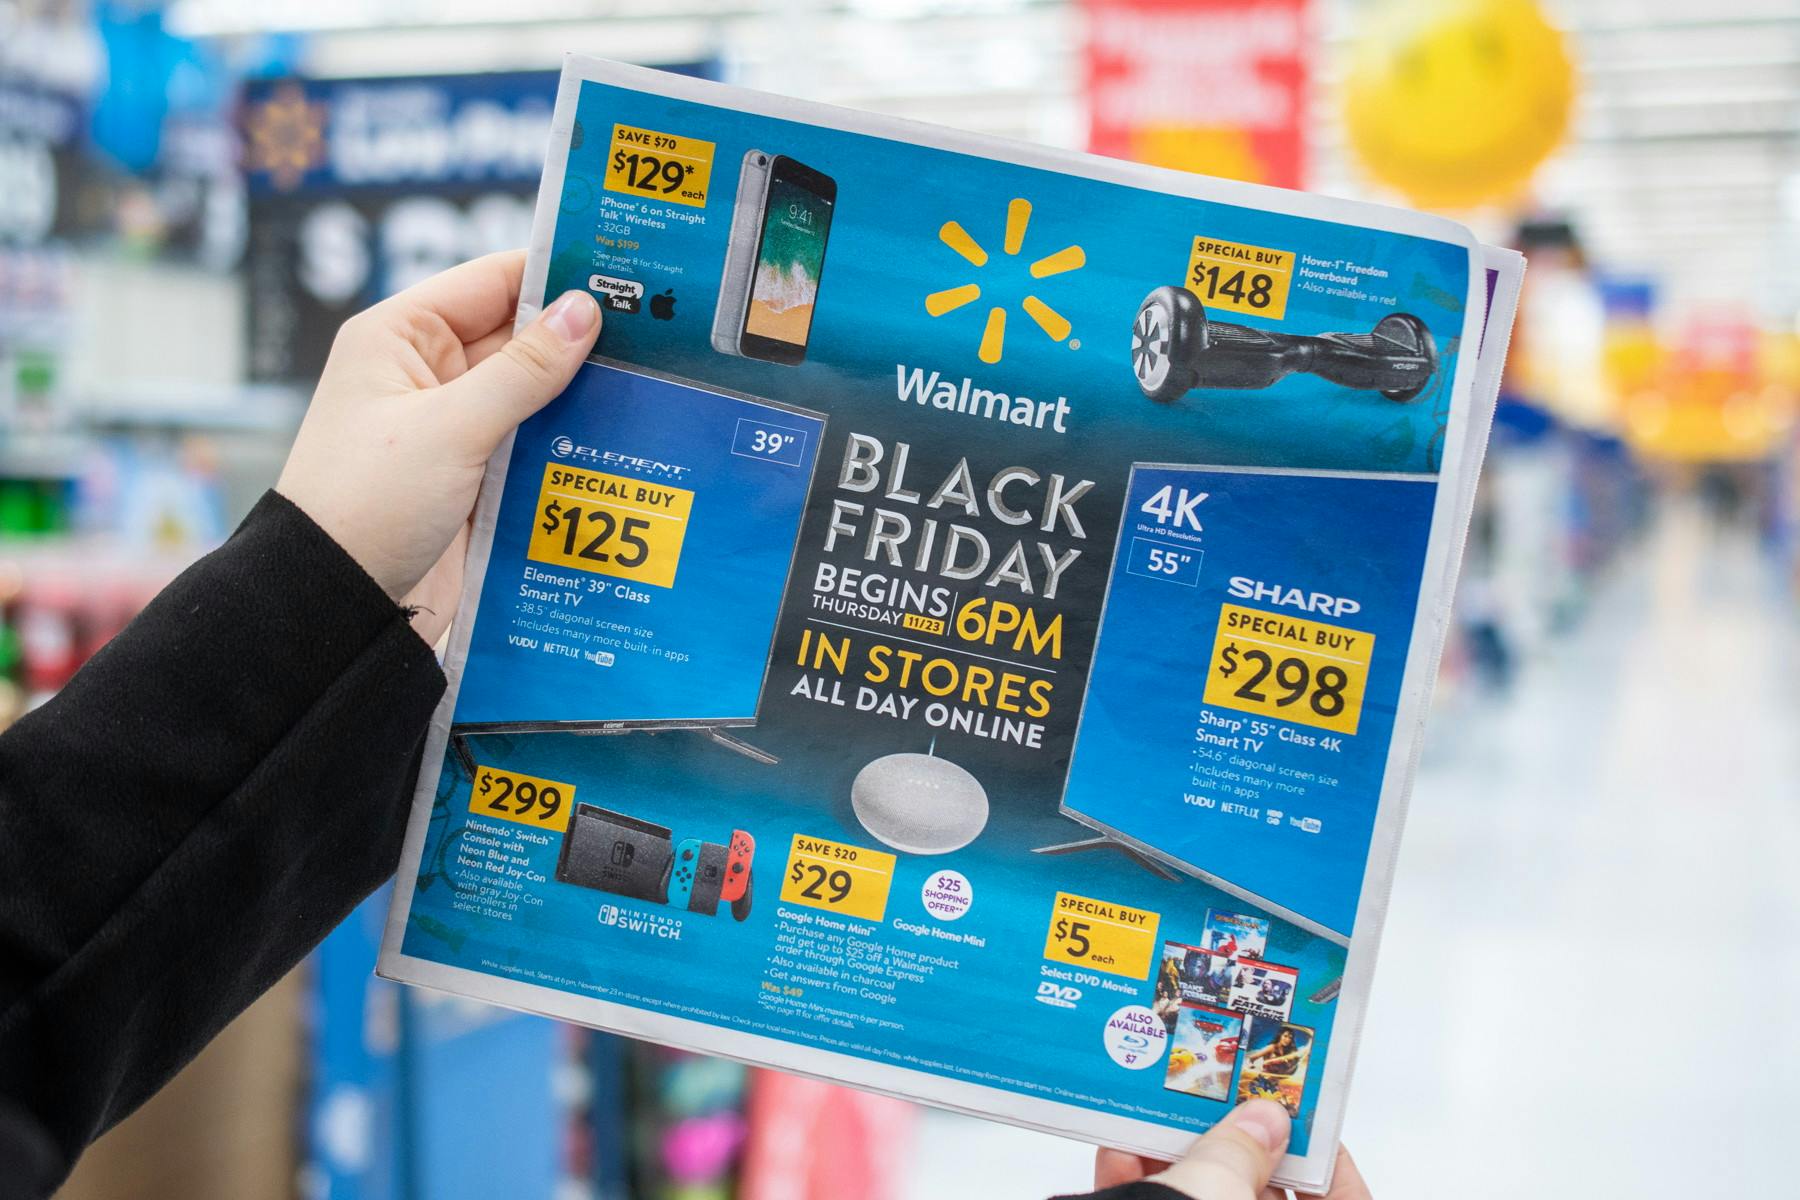 promo codes for walmart online shopping